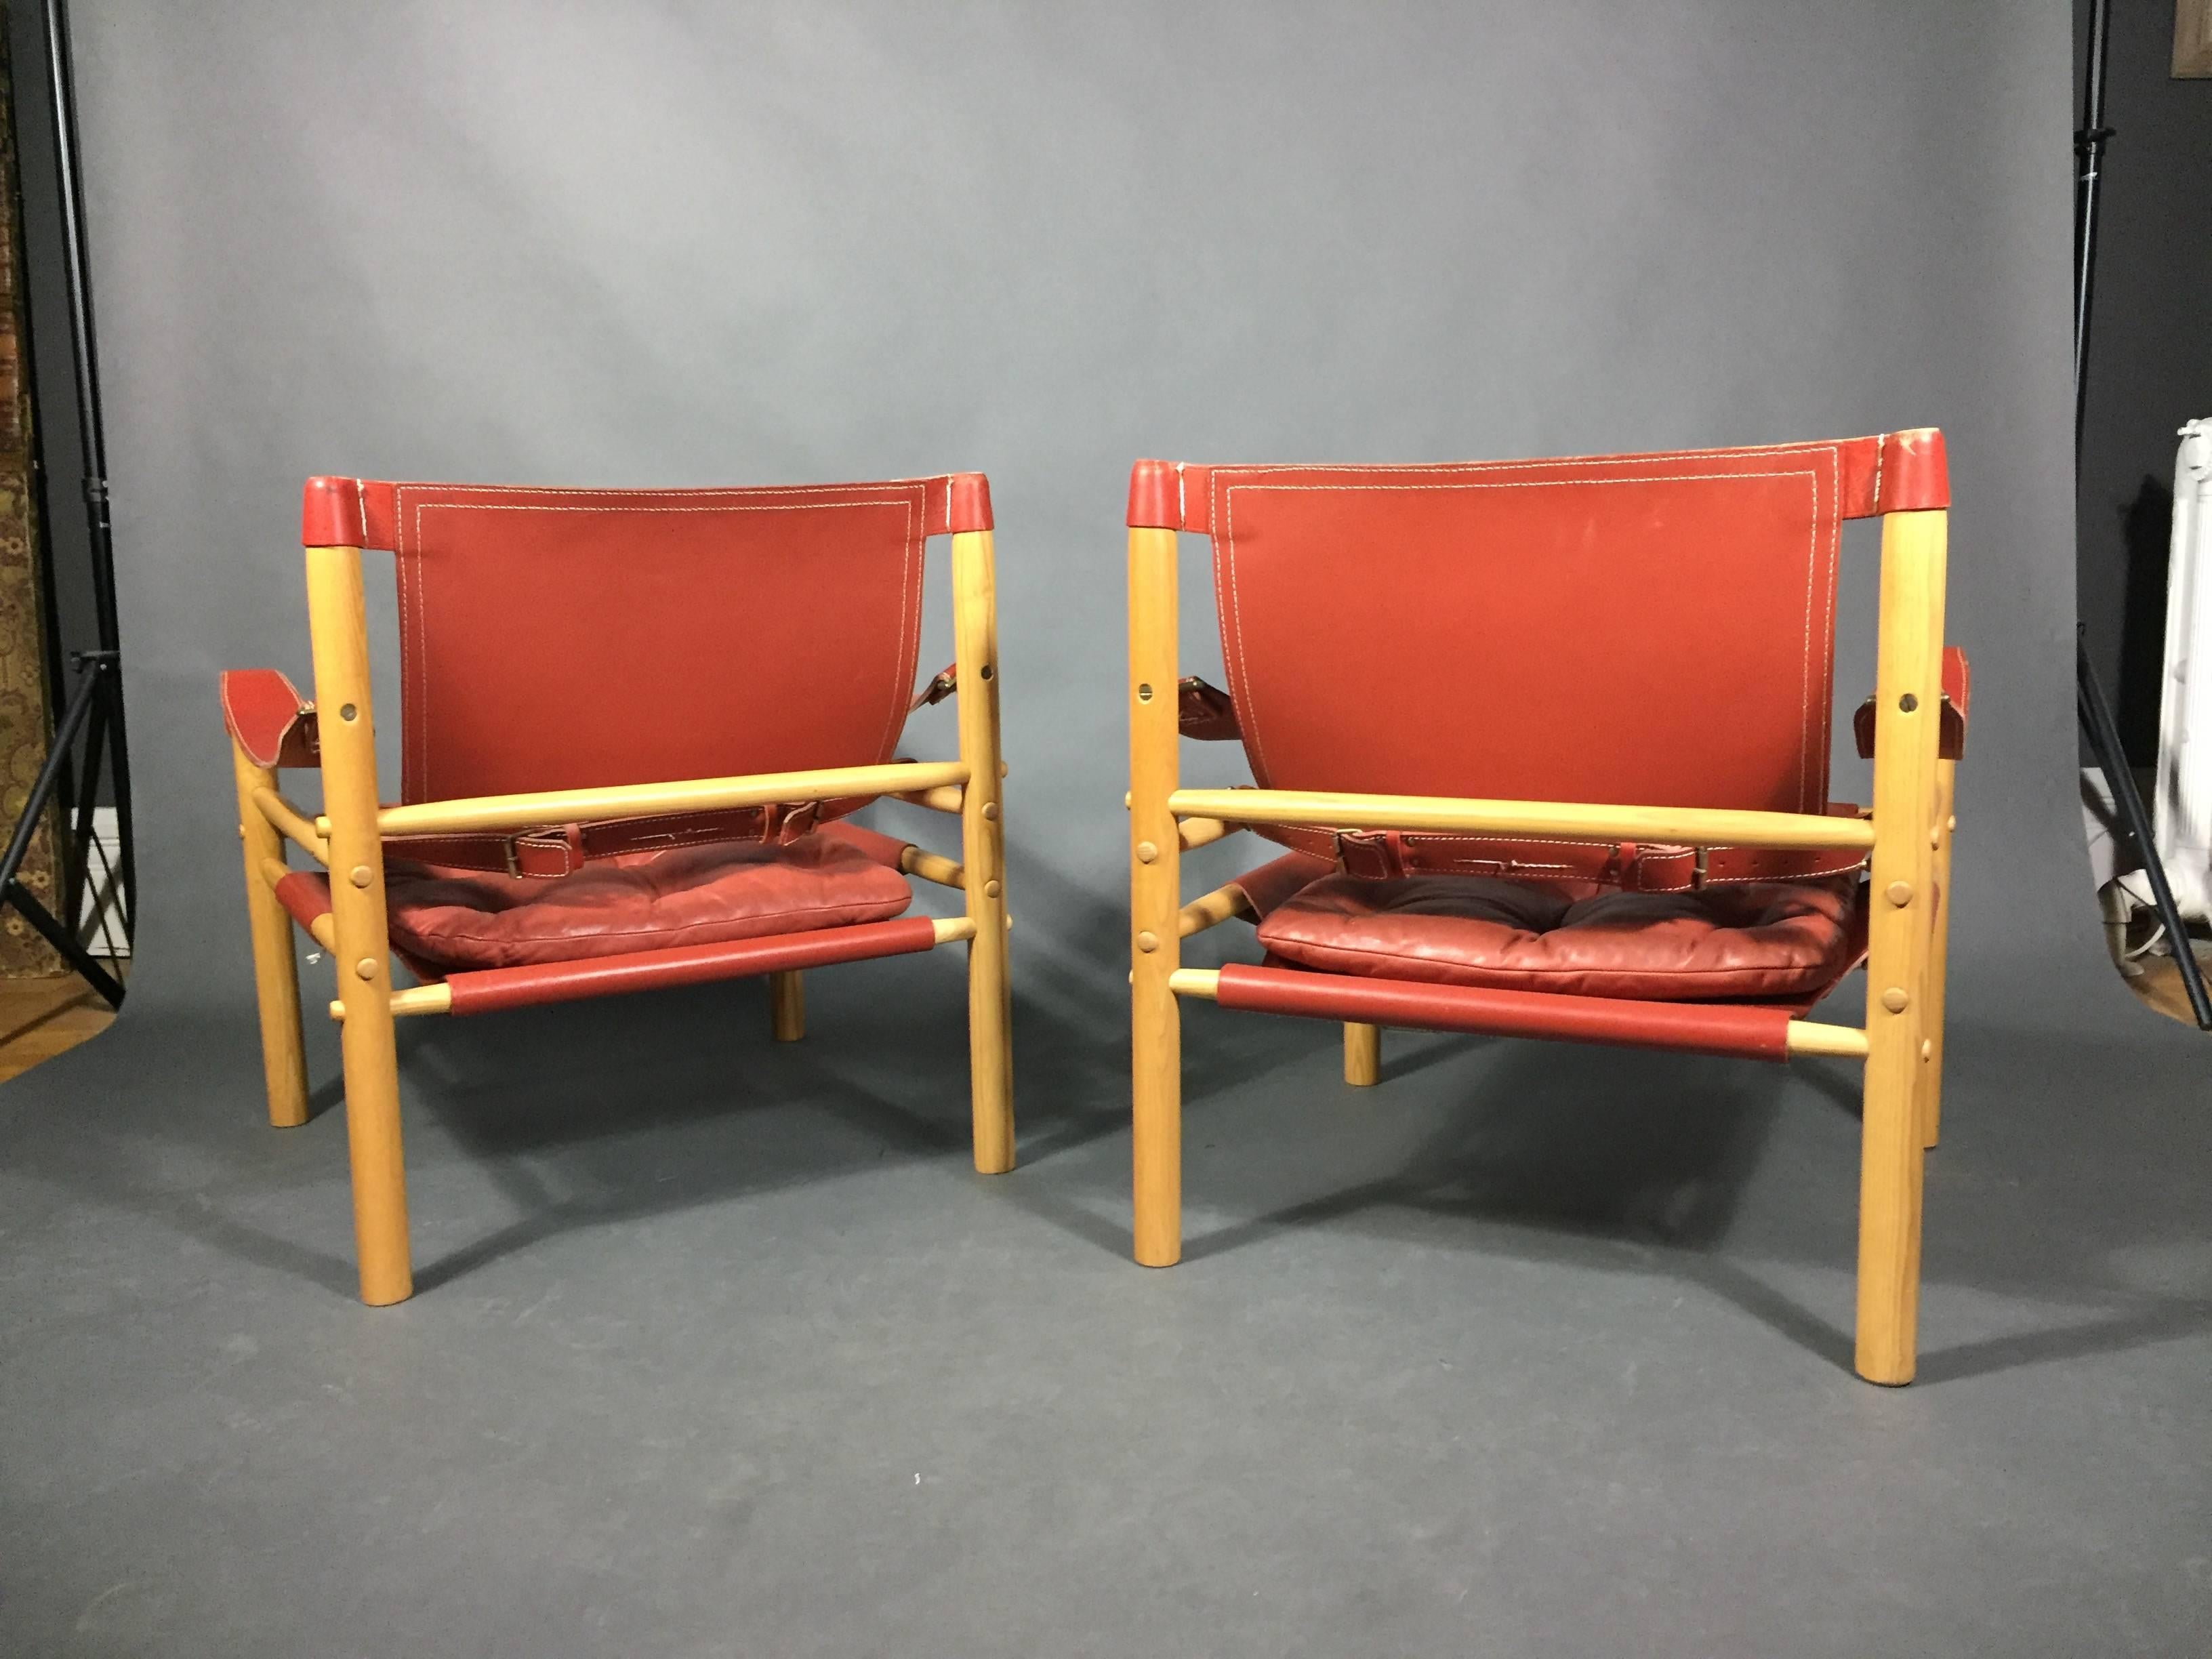 Pair of Arne Norell Red or Orange Leather Sirocco Chairs, Sweden In Excellent Condition For Sale In Hudson, NY